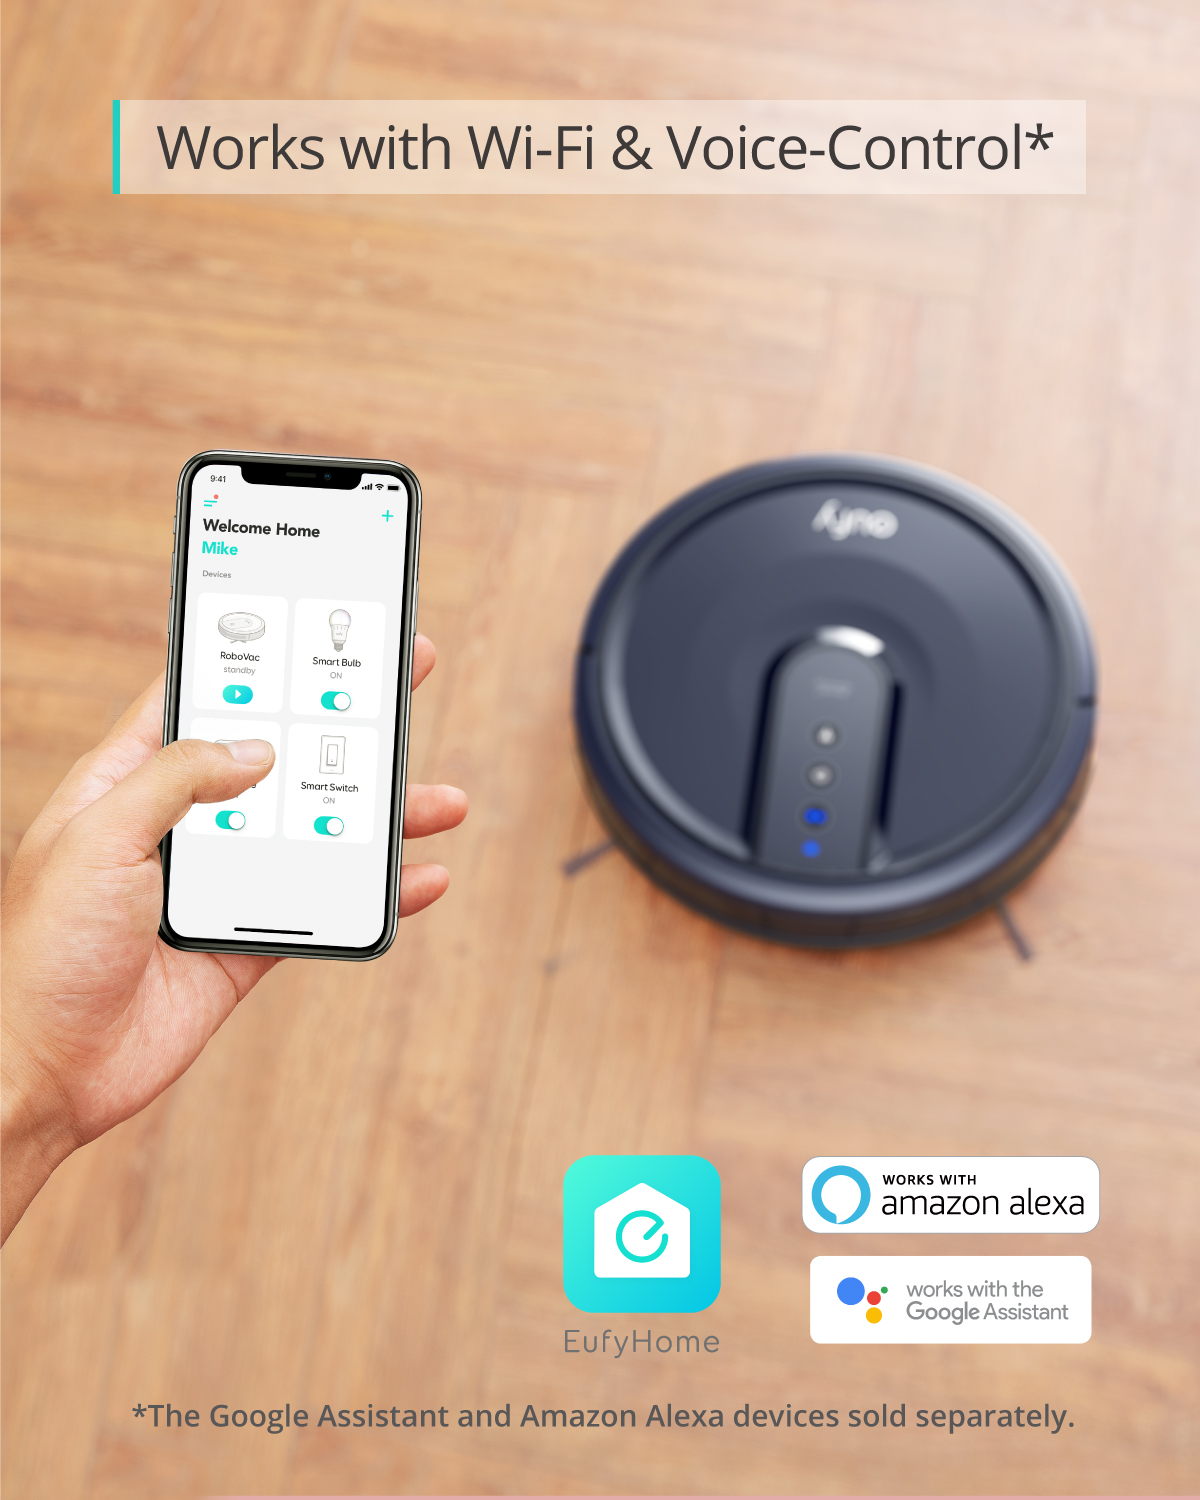 Anker eufy 25C Wi-Fi Connected Robot Vacuum, Great for Picking up Pet Hairs, Quiet, Slim - image 4 of 9